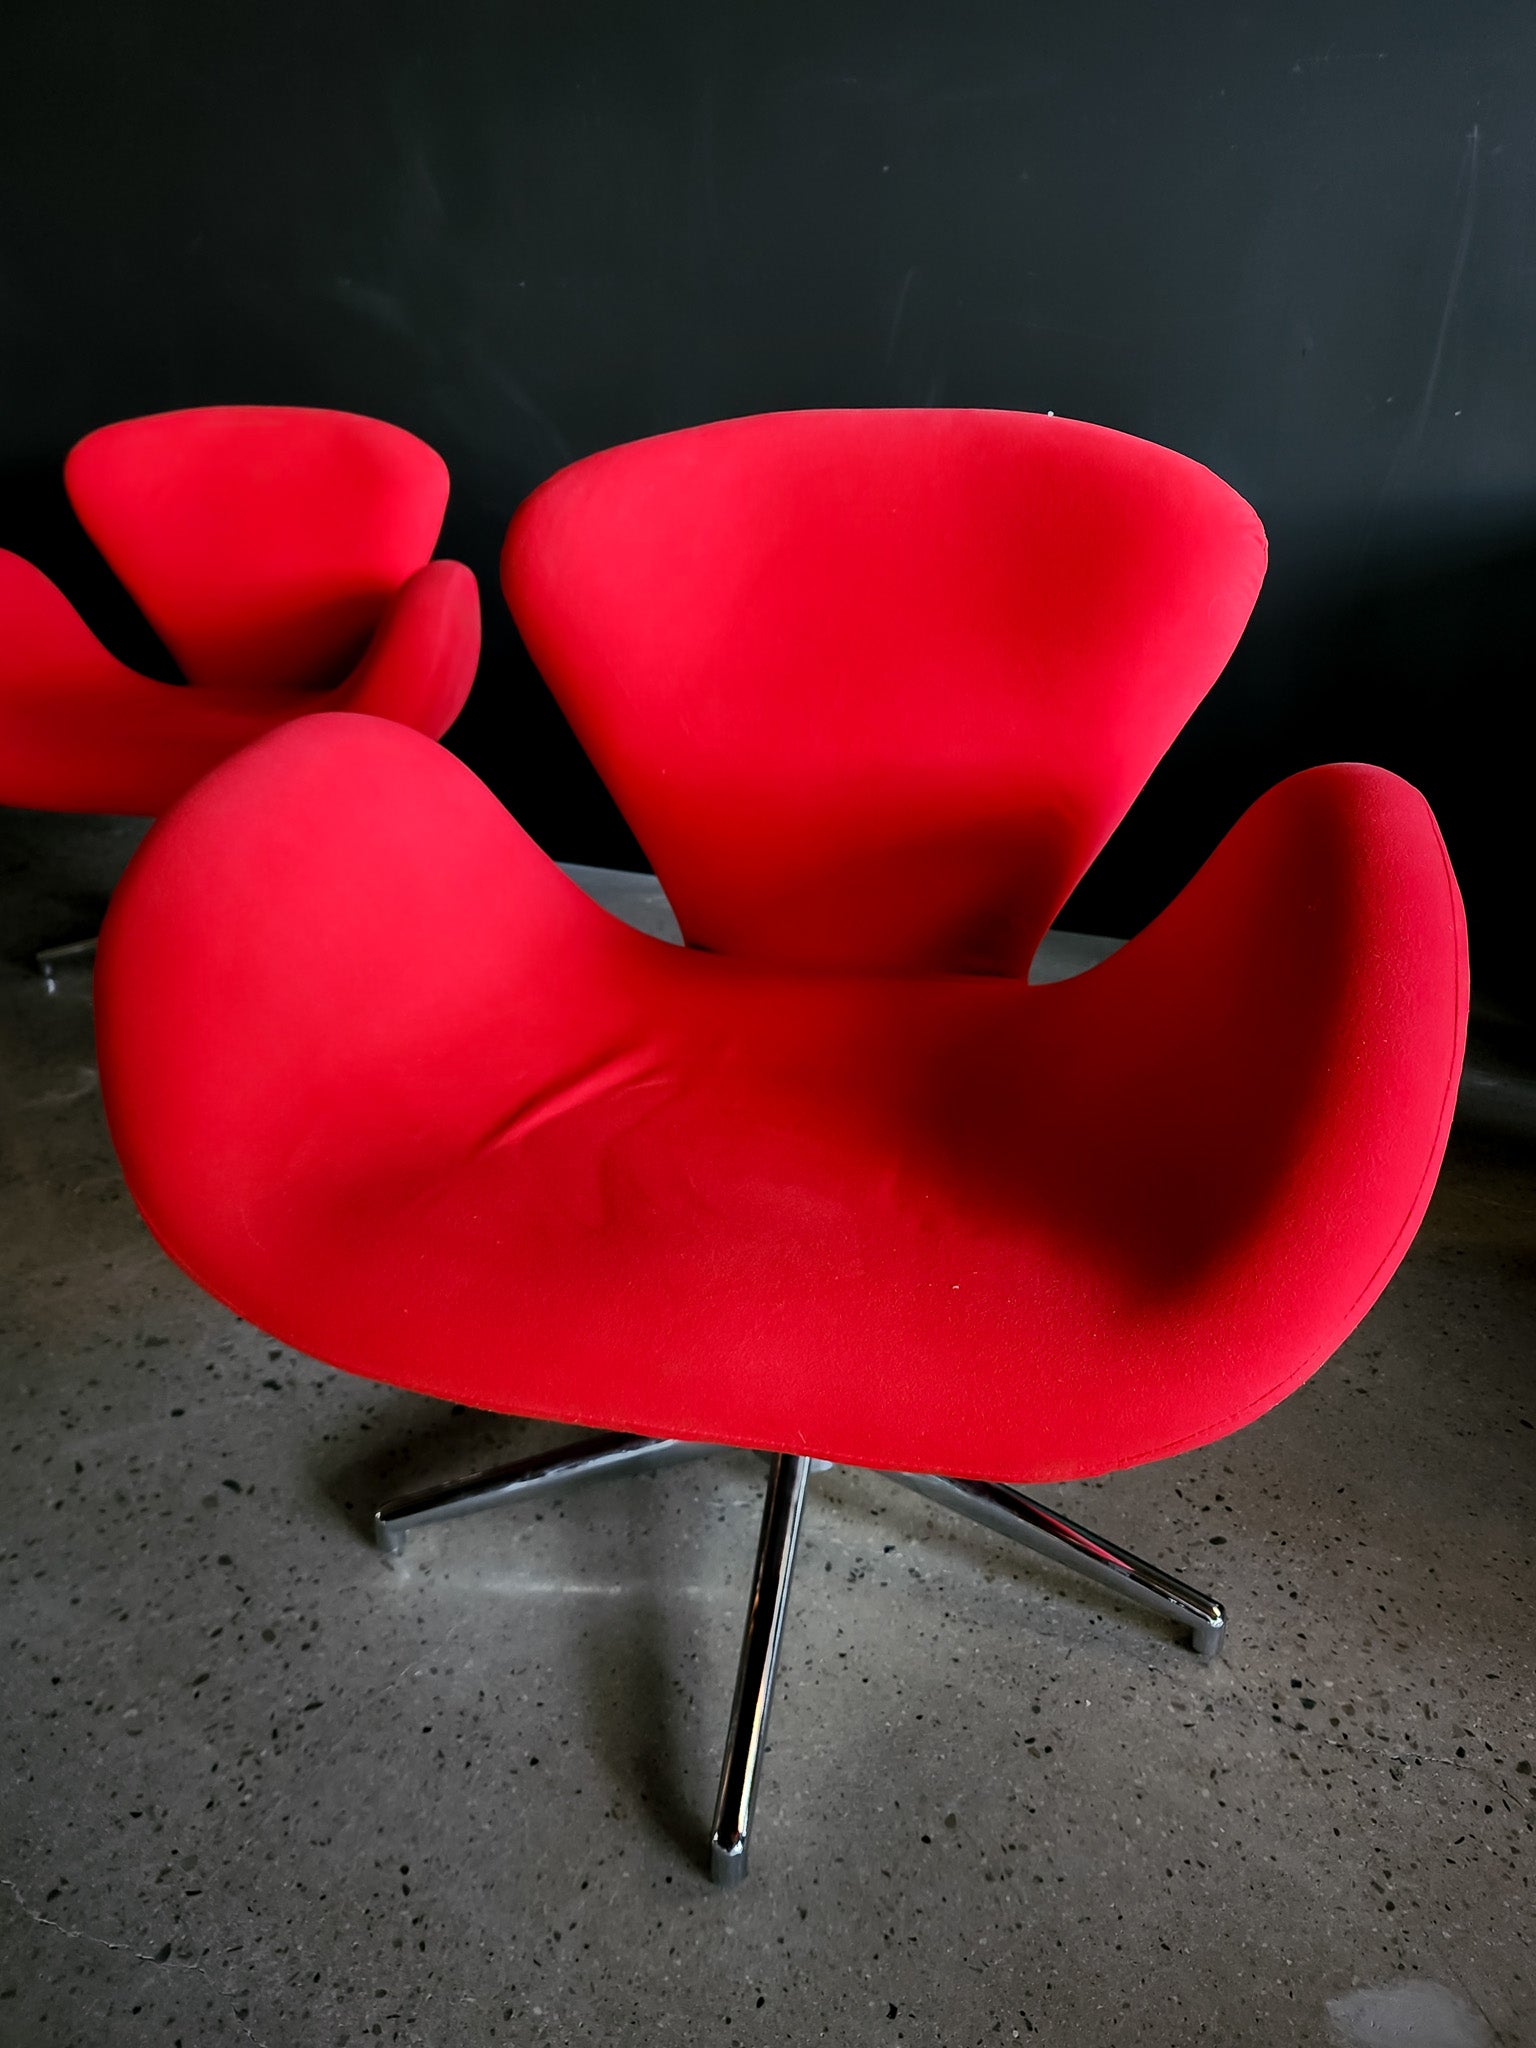 Reproductions of Arne Jacobsen's Swan Chairs - Reclaimed Mt. Goods